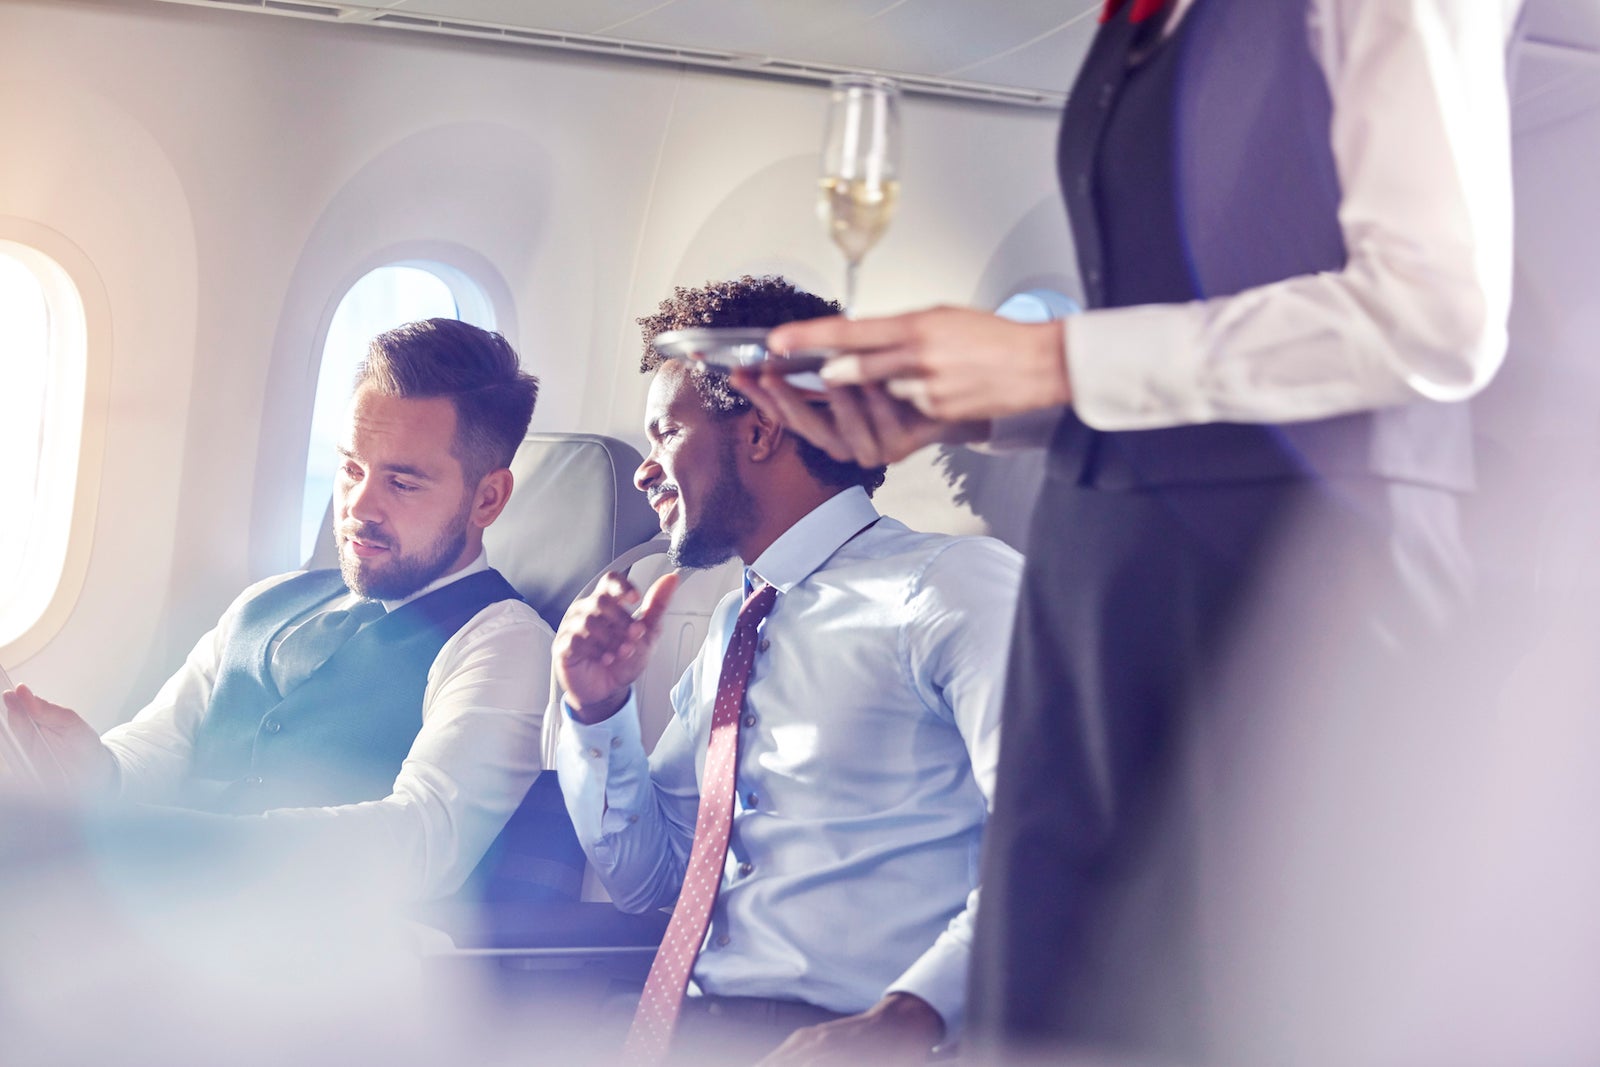 Flight attendant serving champagne to businessmen in first class on airplane